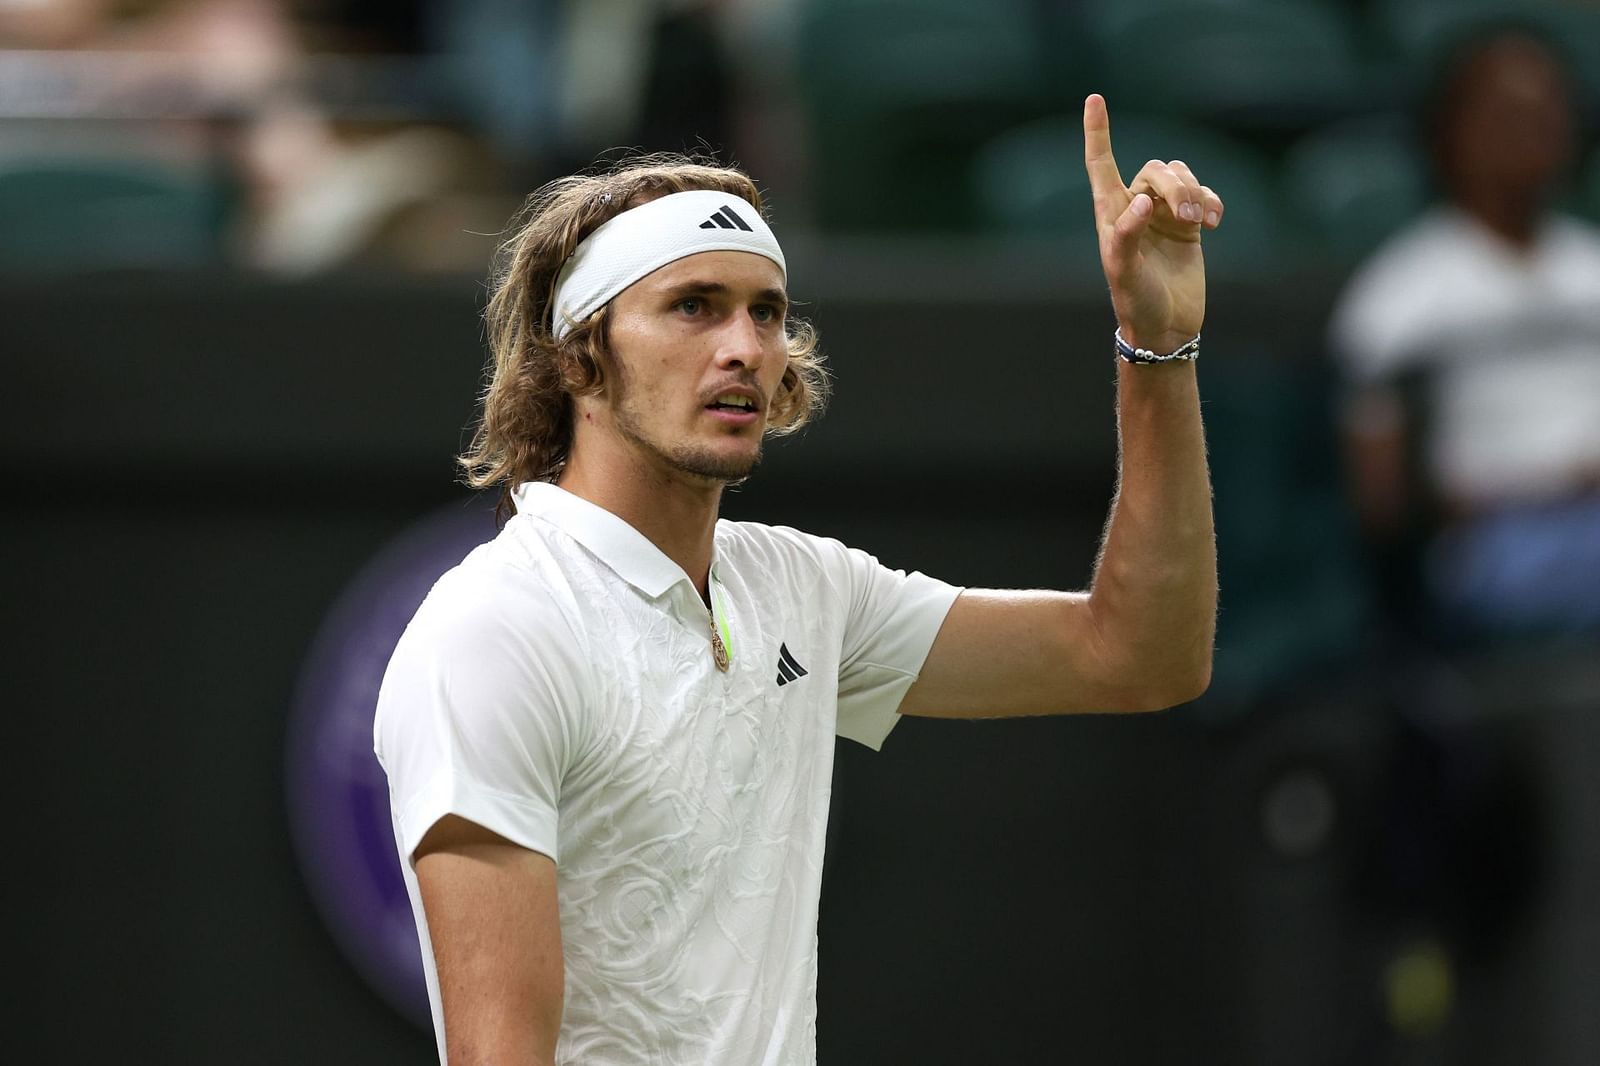 Alexander Zverev caught in the midst of another assault allegation ...